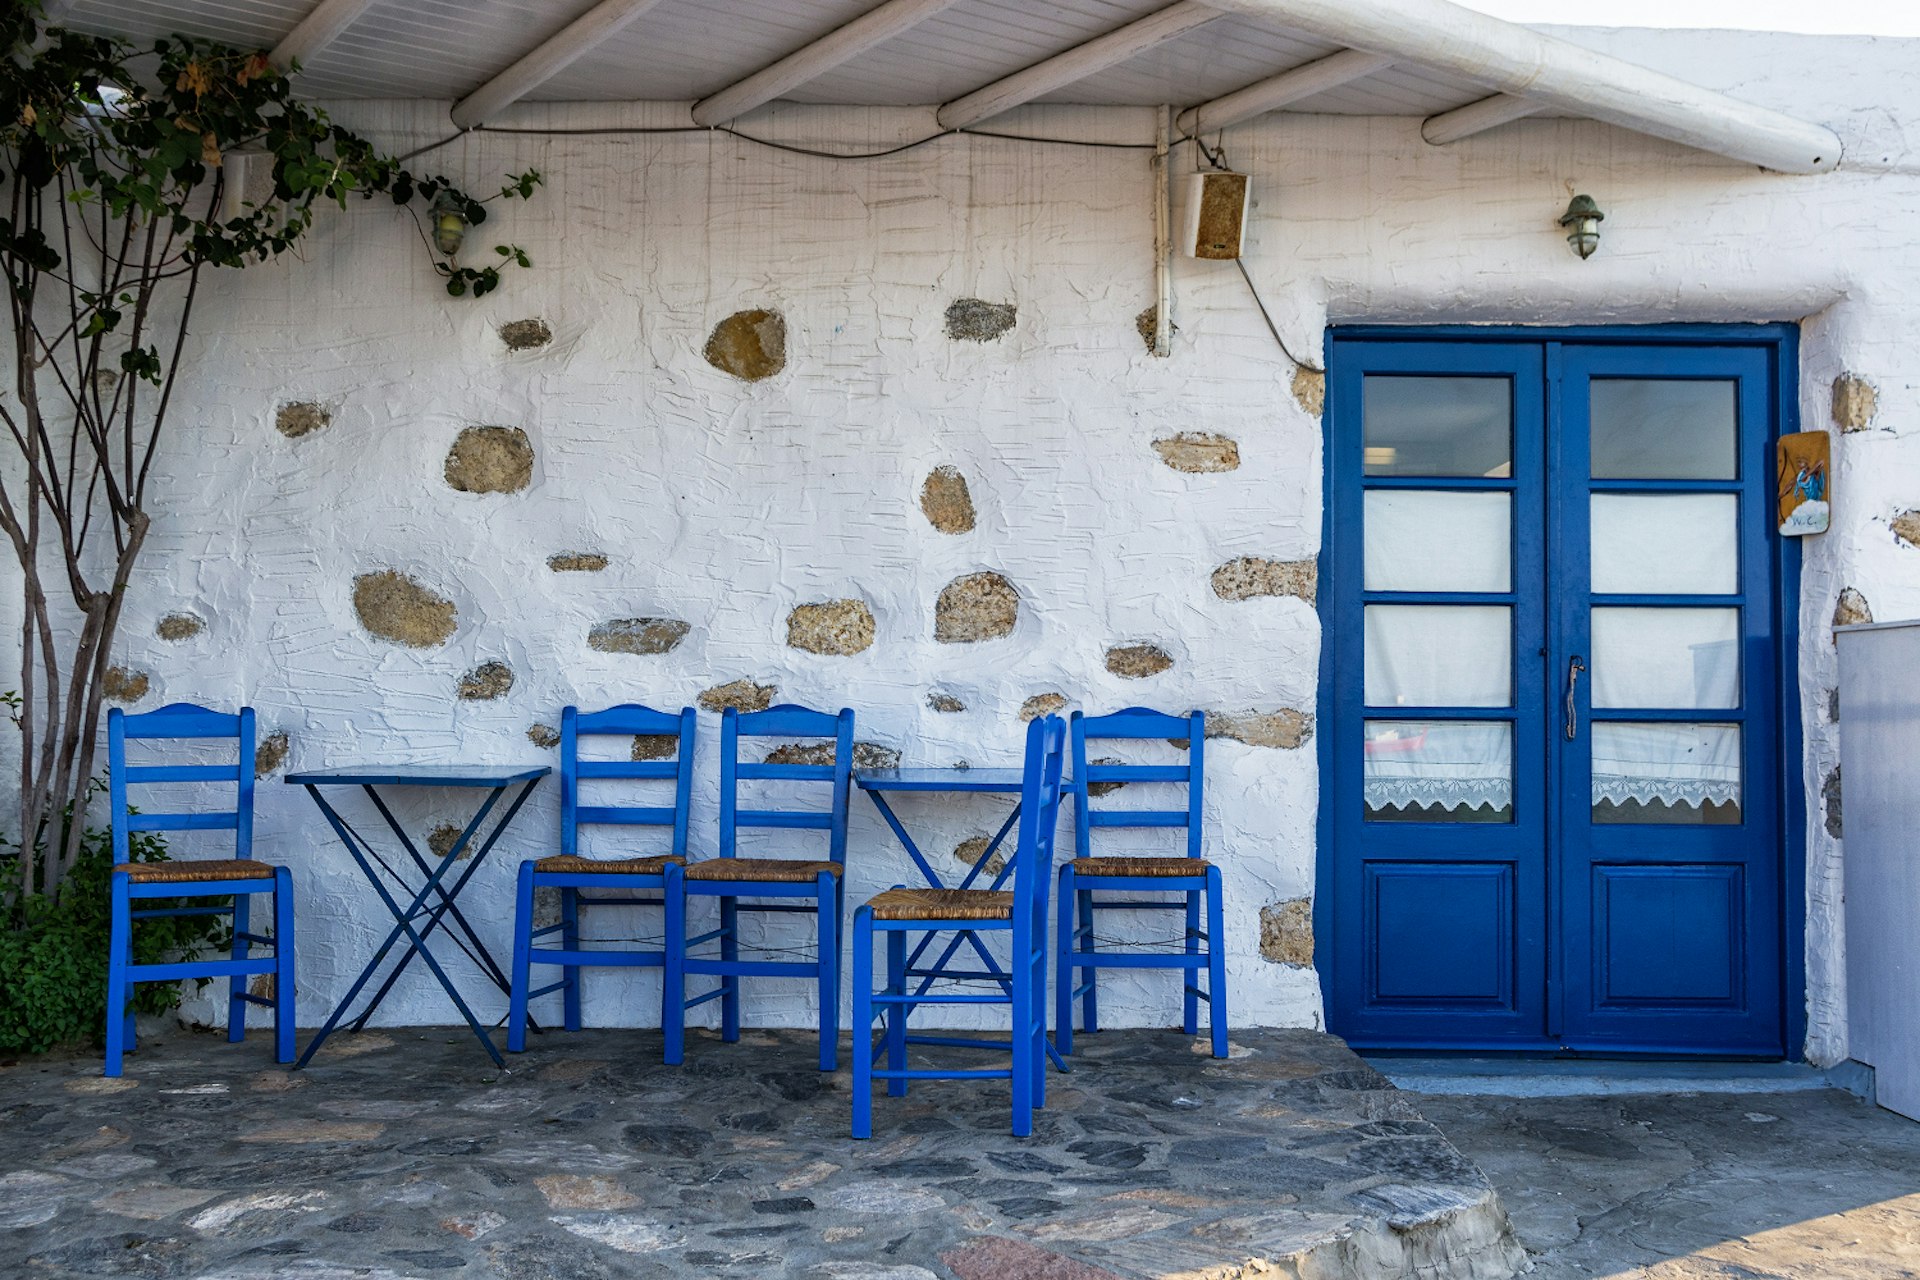 Small rustic taverna awaiting guests in Ano Koufonisi © Konstantinos_K / iStock / Getty Images